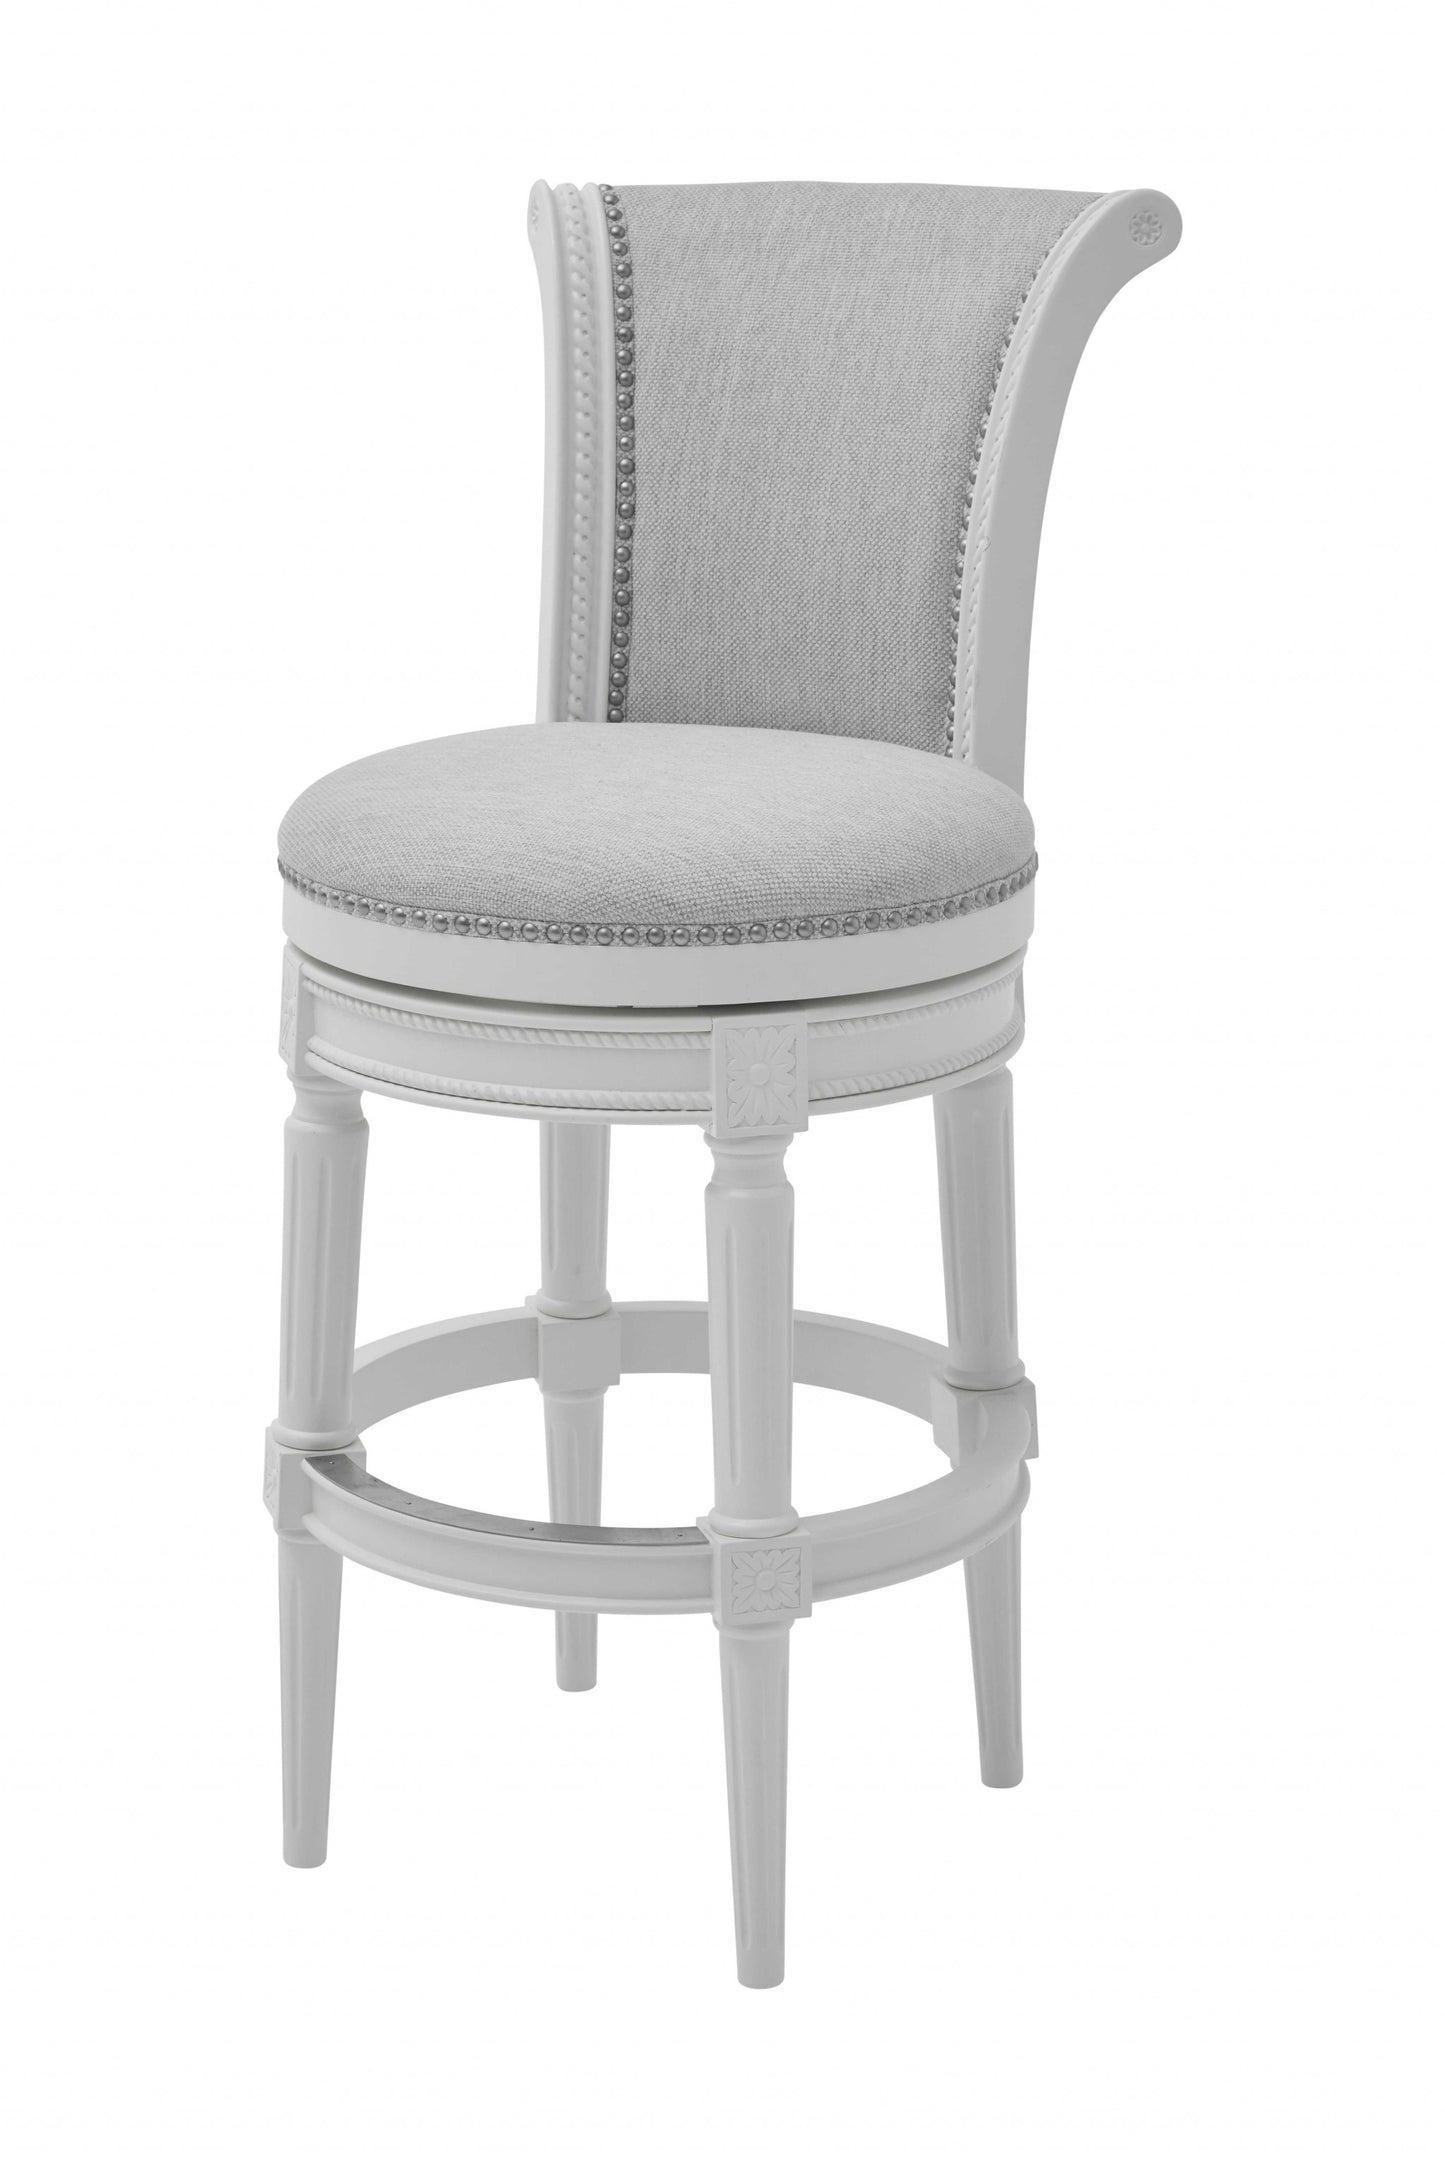 45" Light Gray And White Solid Wood Bar Chair With Footrest